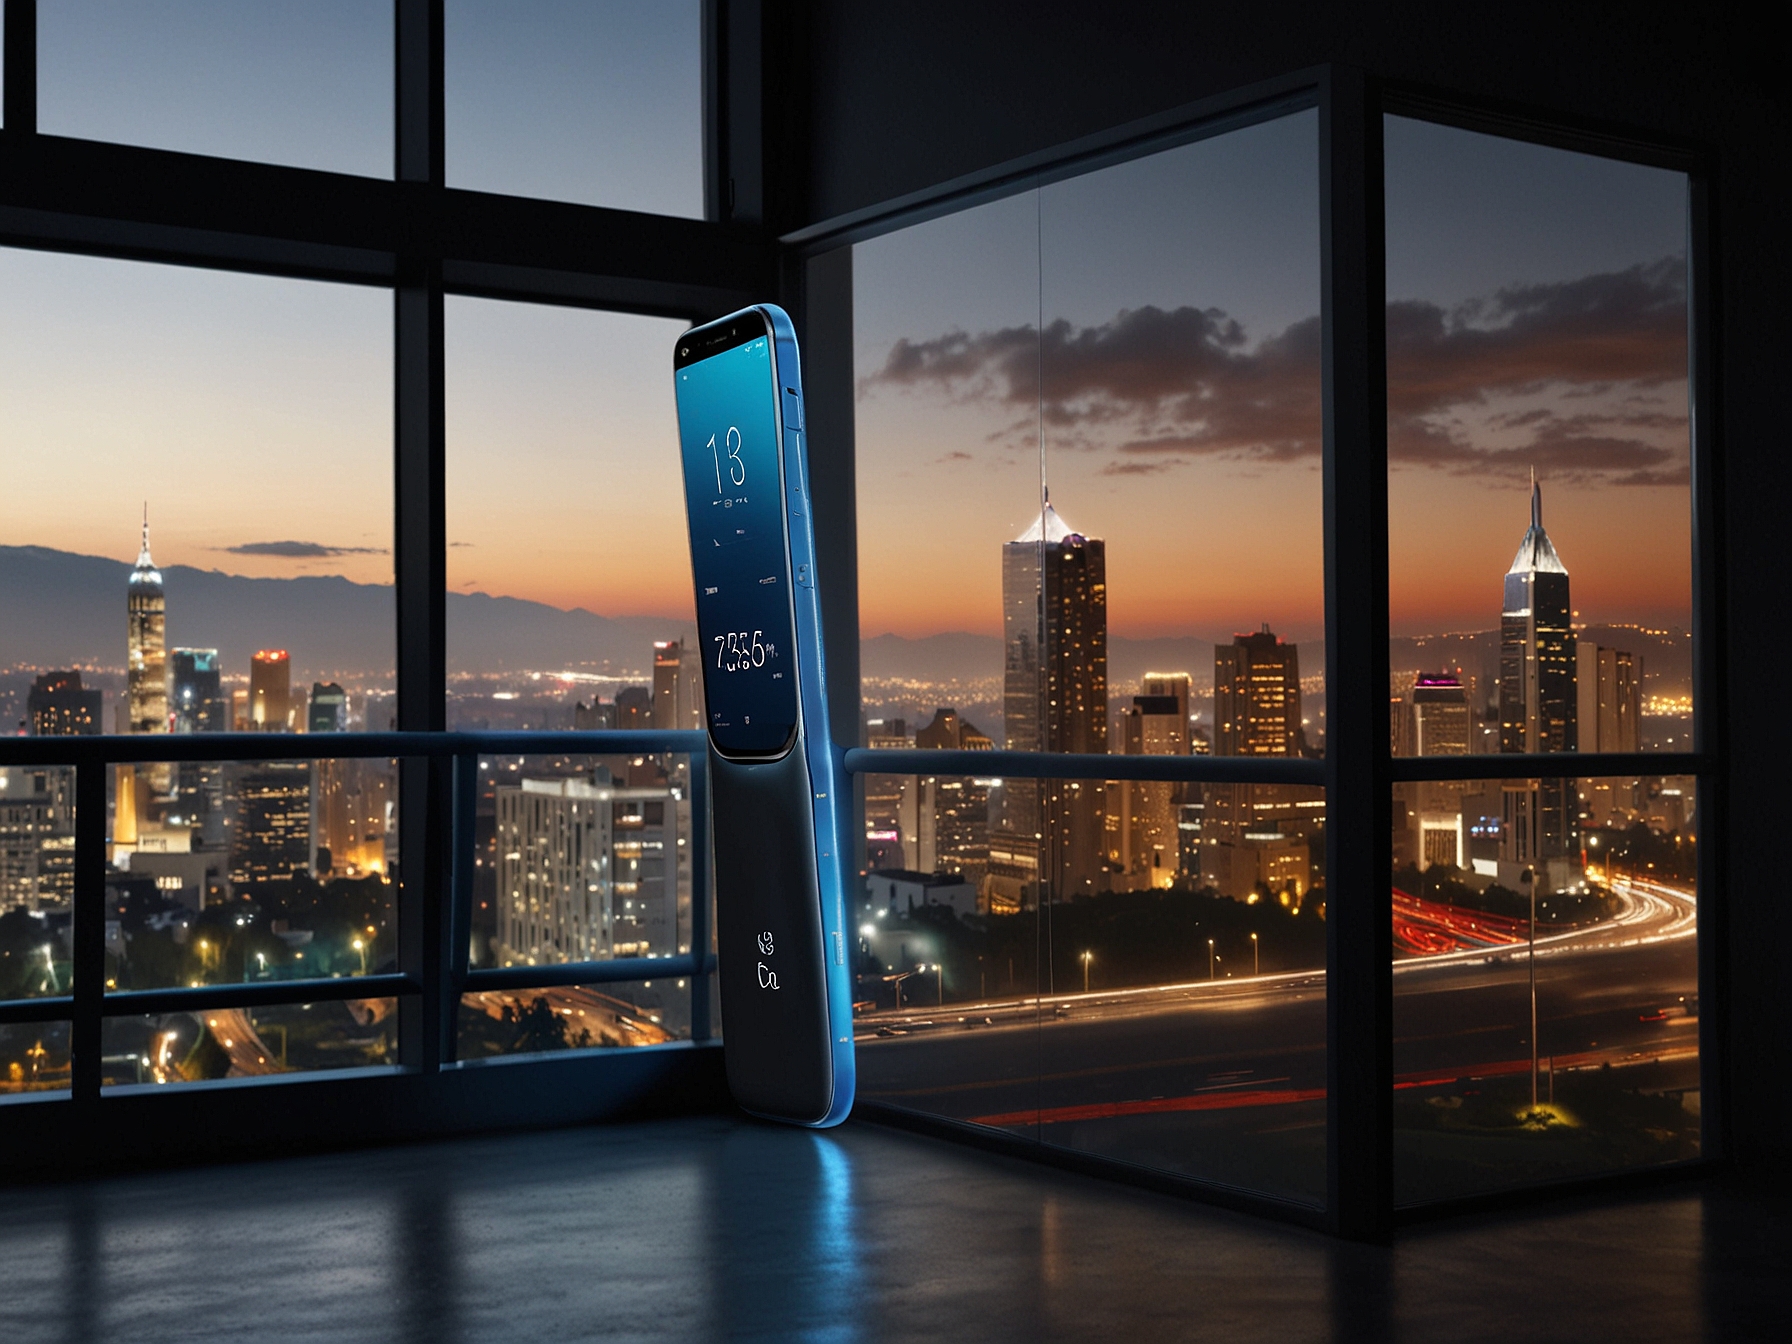 A photo demonstrating the dual 5G capabilities of the Vivo T3 Lite 5G, featuring icons and visuals of fast internet speeds, seamless online streaming, and reliability, underscoring the phone's connectivity strengths.